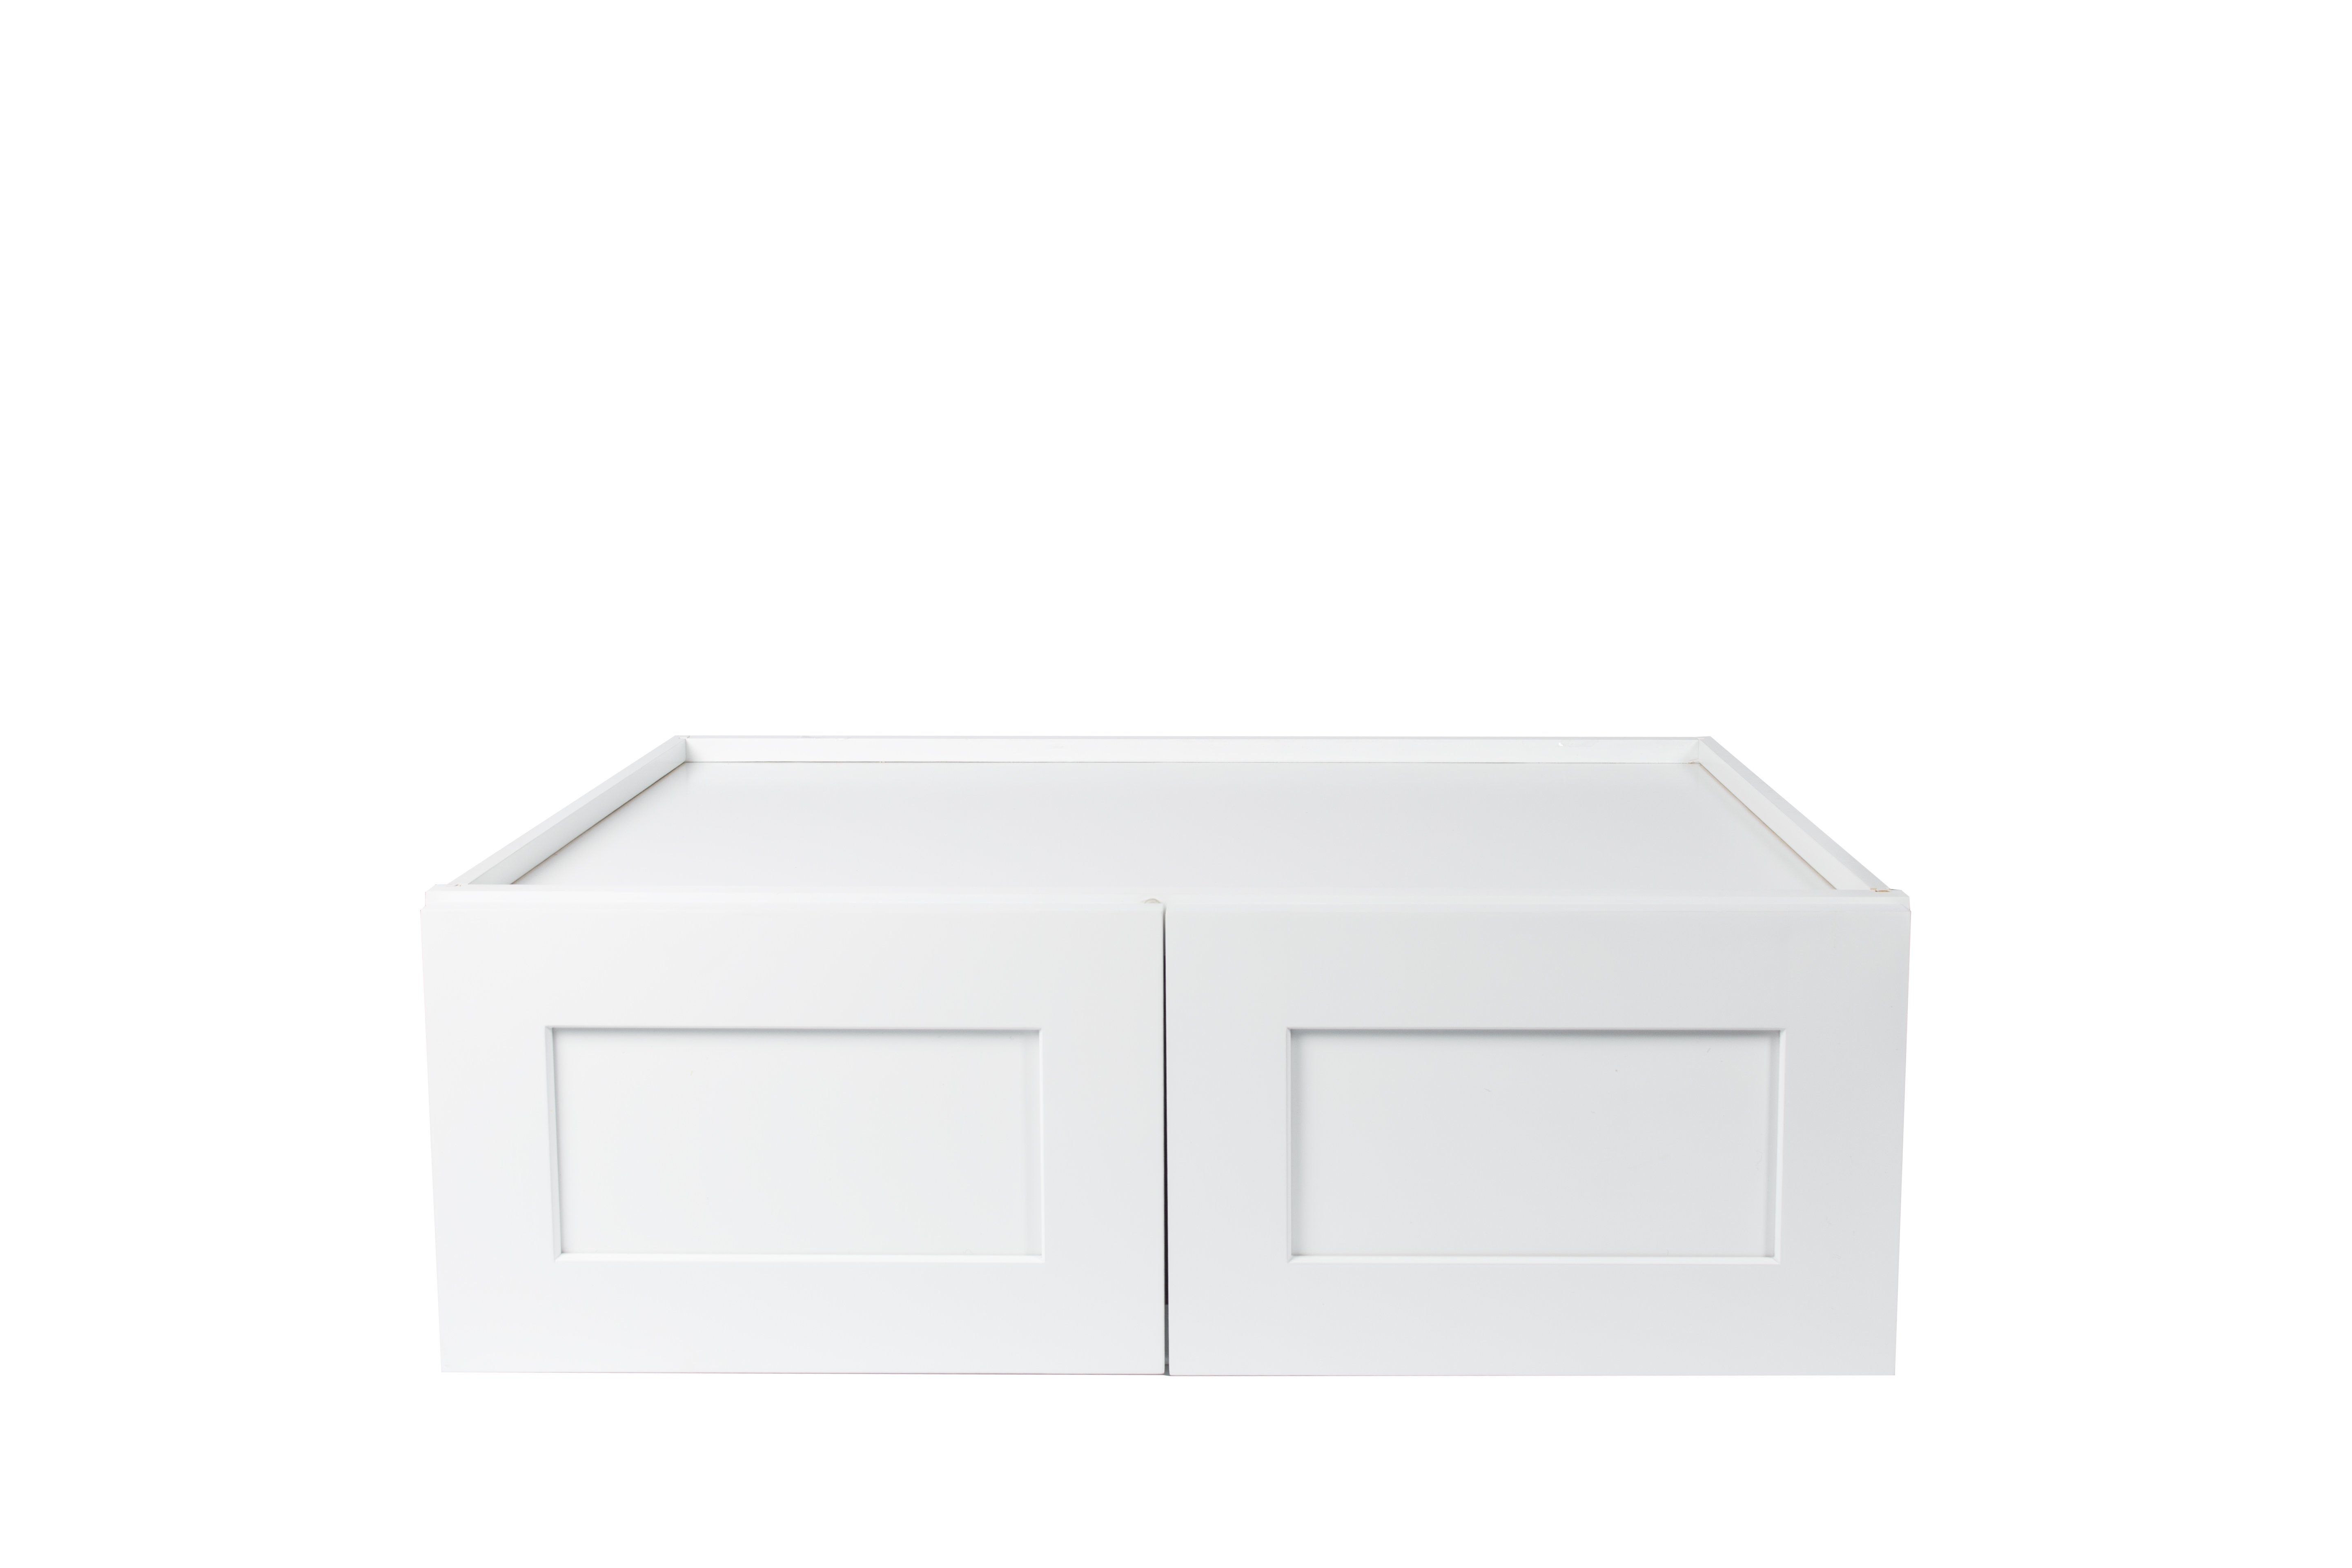 Ready to Assemble 30x15x12 in. Shaker High Double Door Wall Cabinet in White